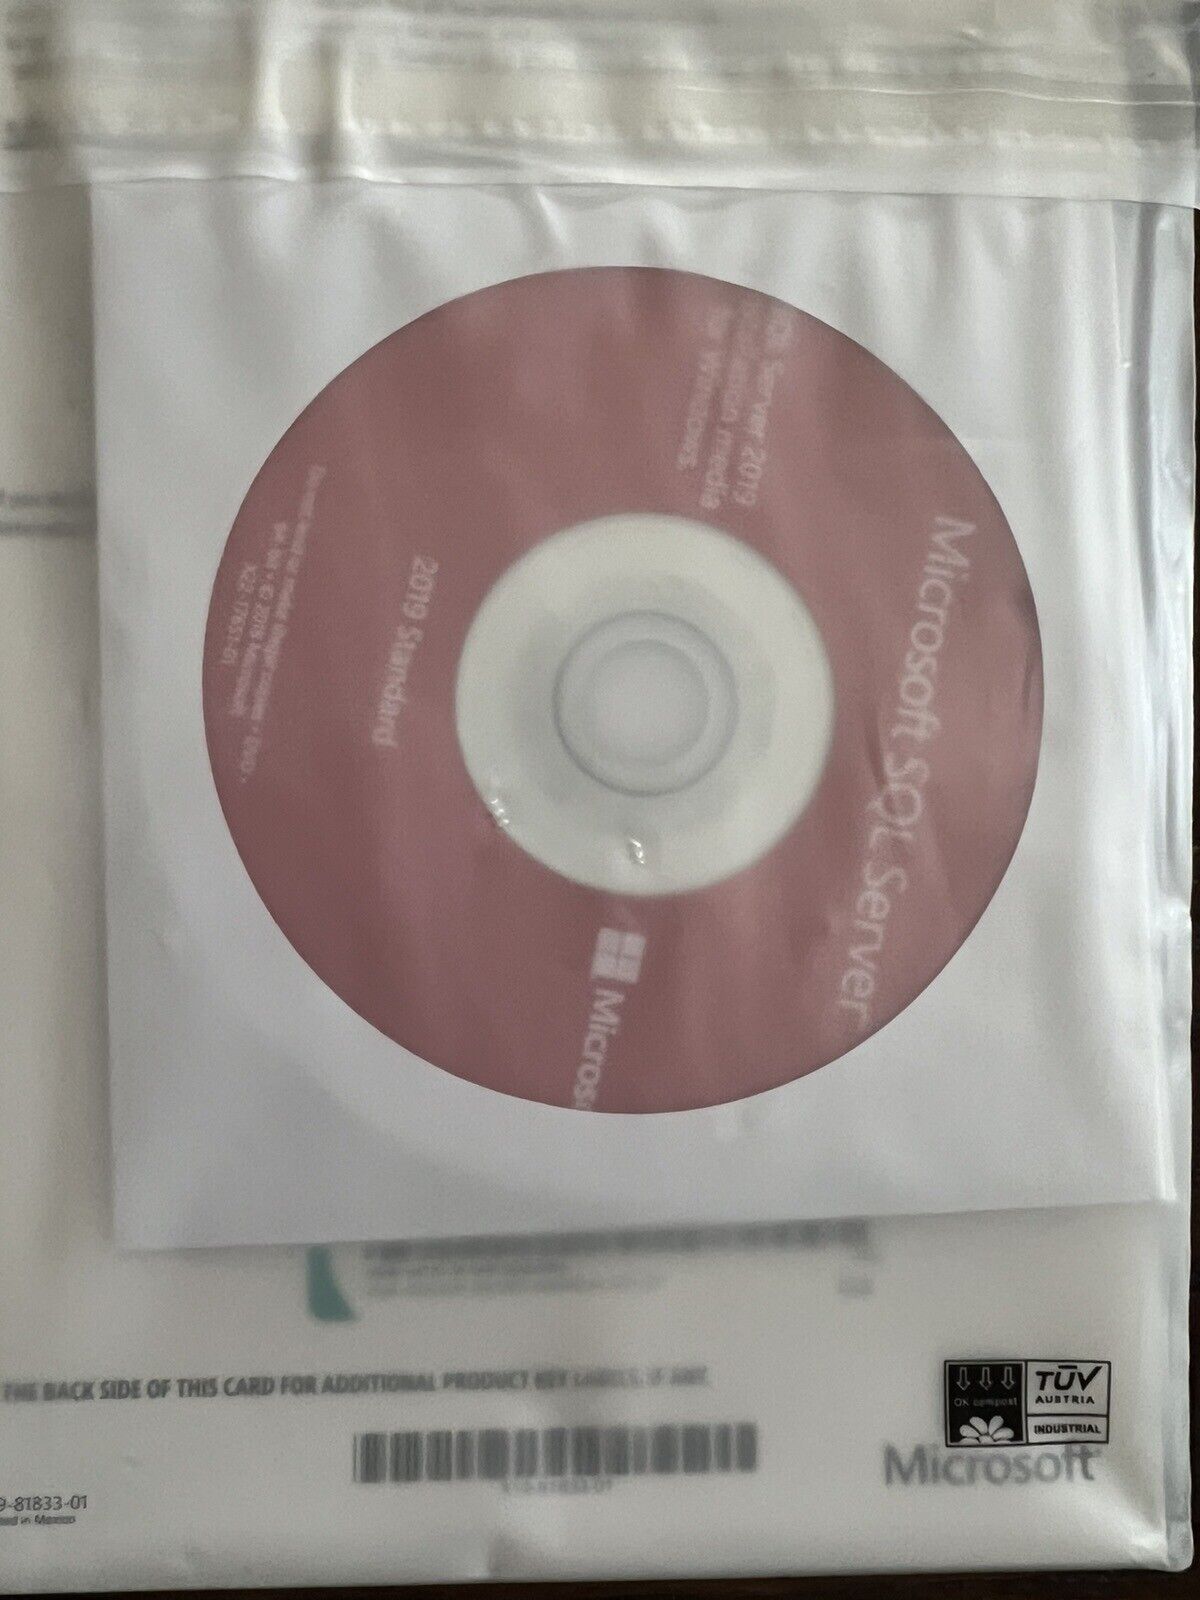 SQL Server 2022 Physical Item With 5 CAL Come With Downgrade DVD License To 2019